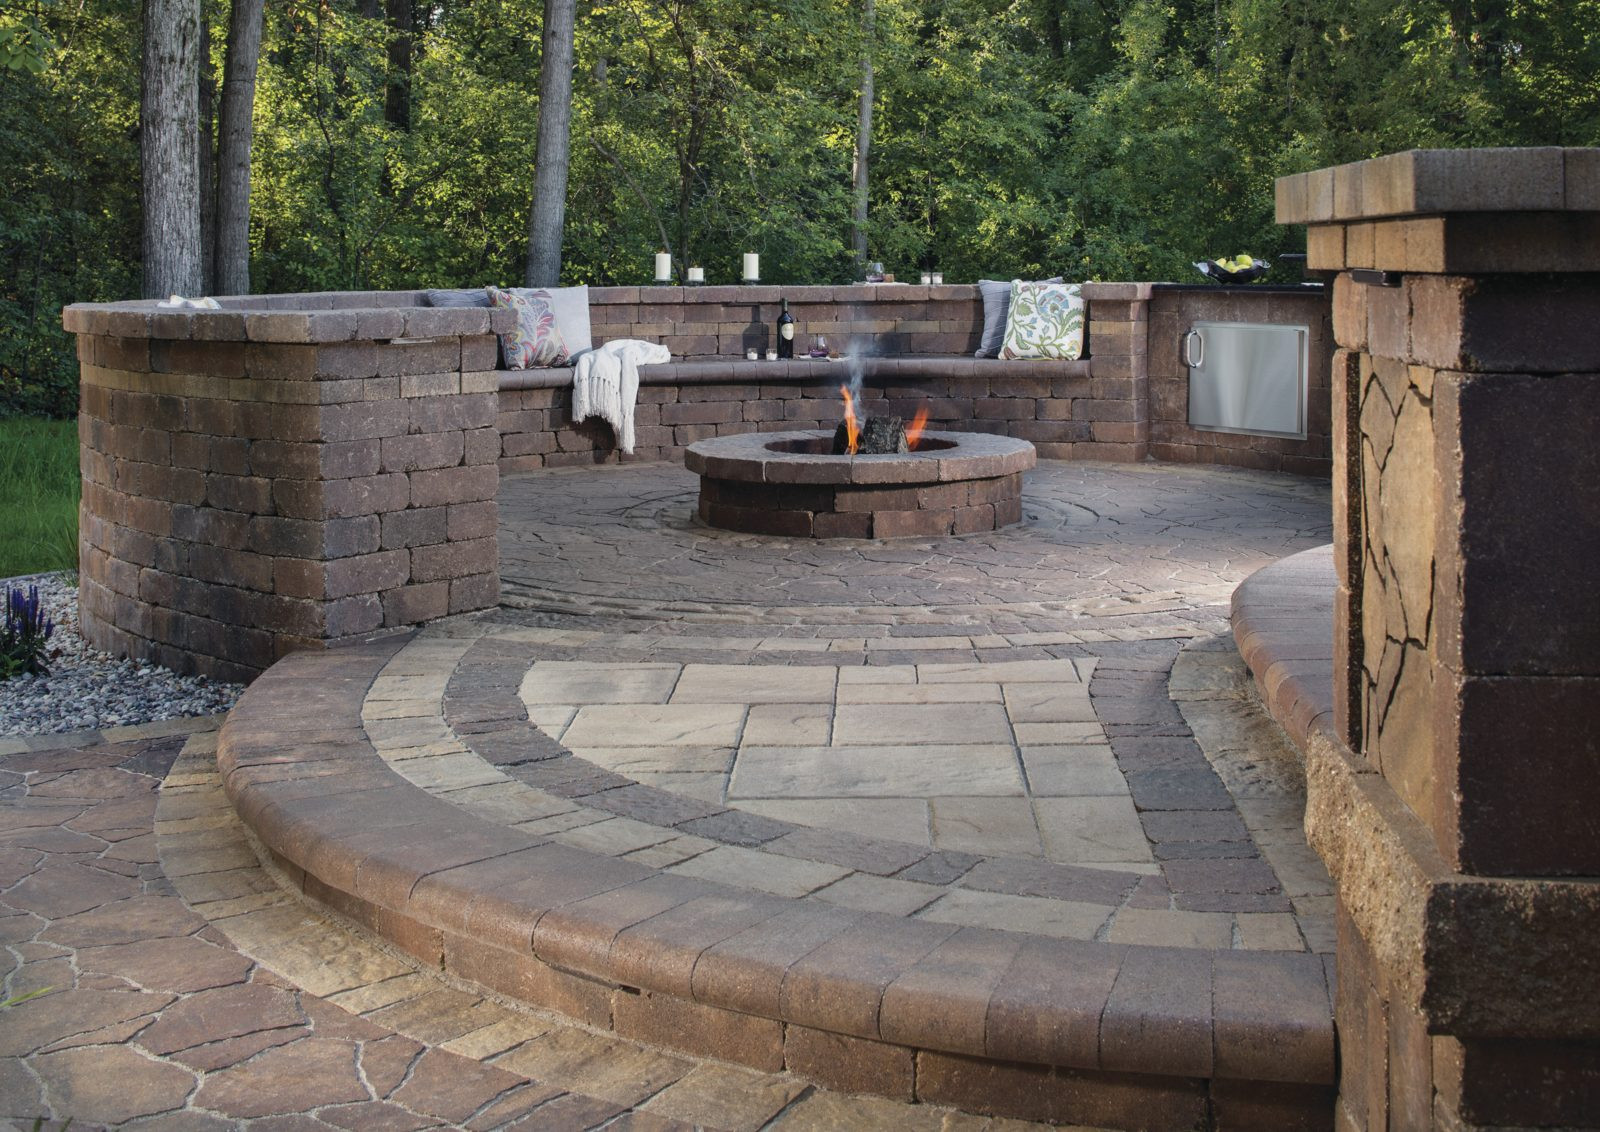 Paver Patio With Fire Pit
 Turn Up the Heat with These Cozy Fire Pit Patio Design